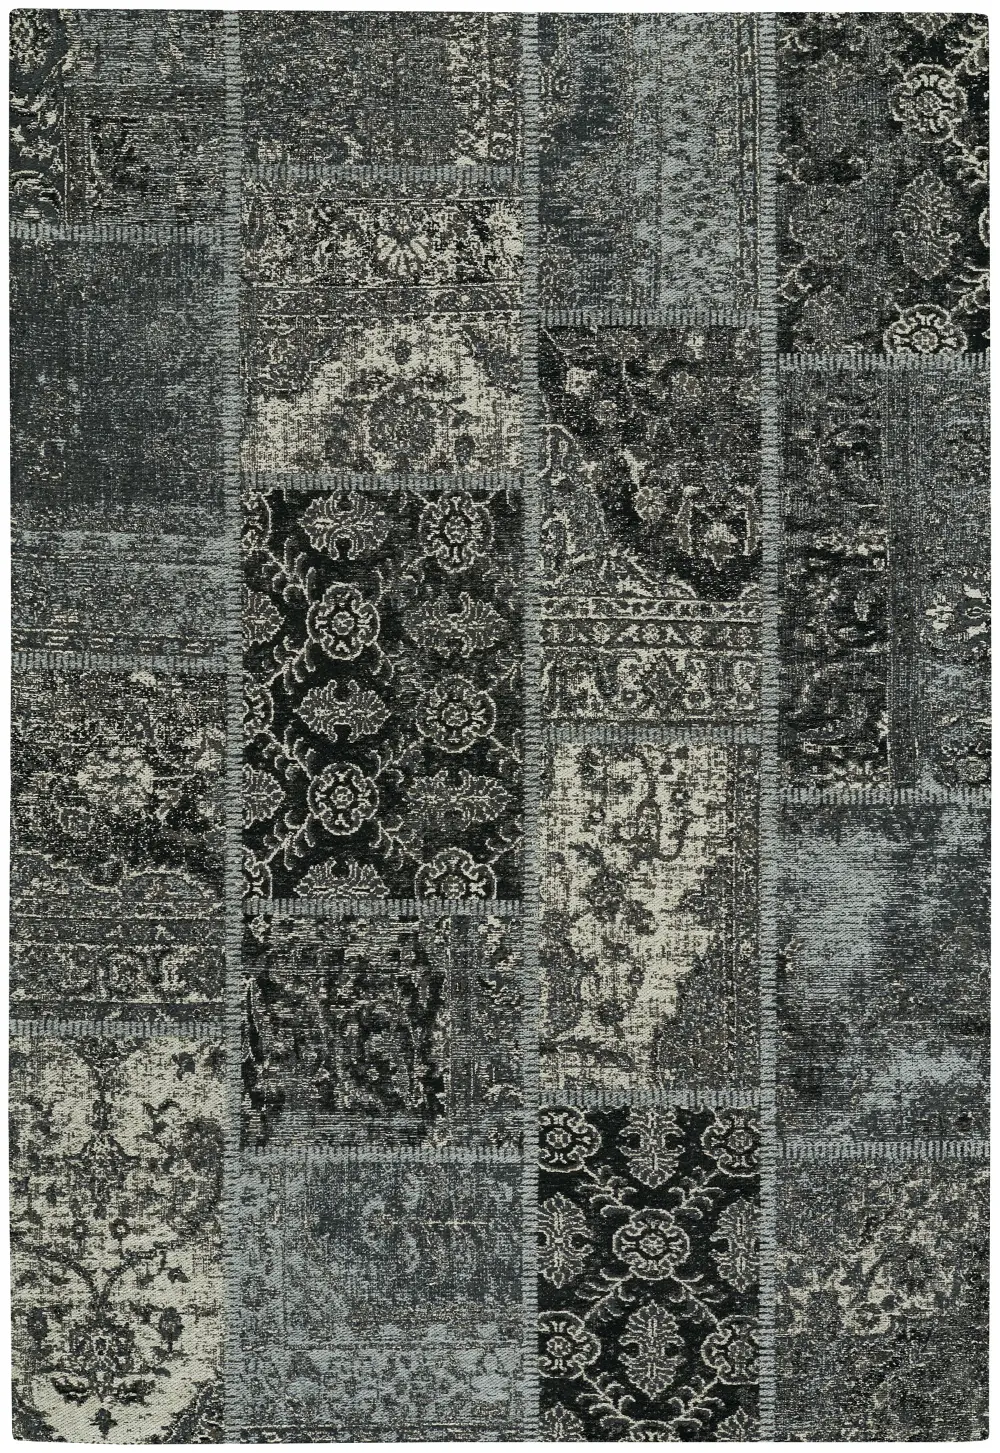 3246RS05000800350 5 x 8 Medium Silver and Black Area Rug - Cosmic-Patchwork-1